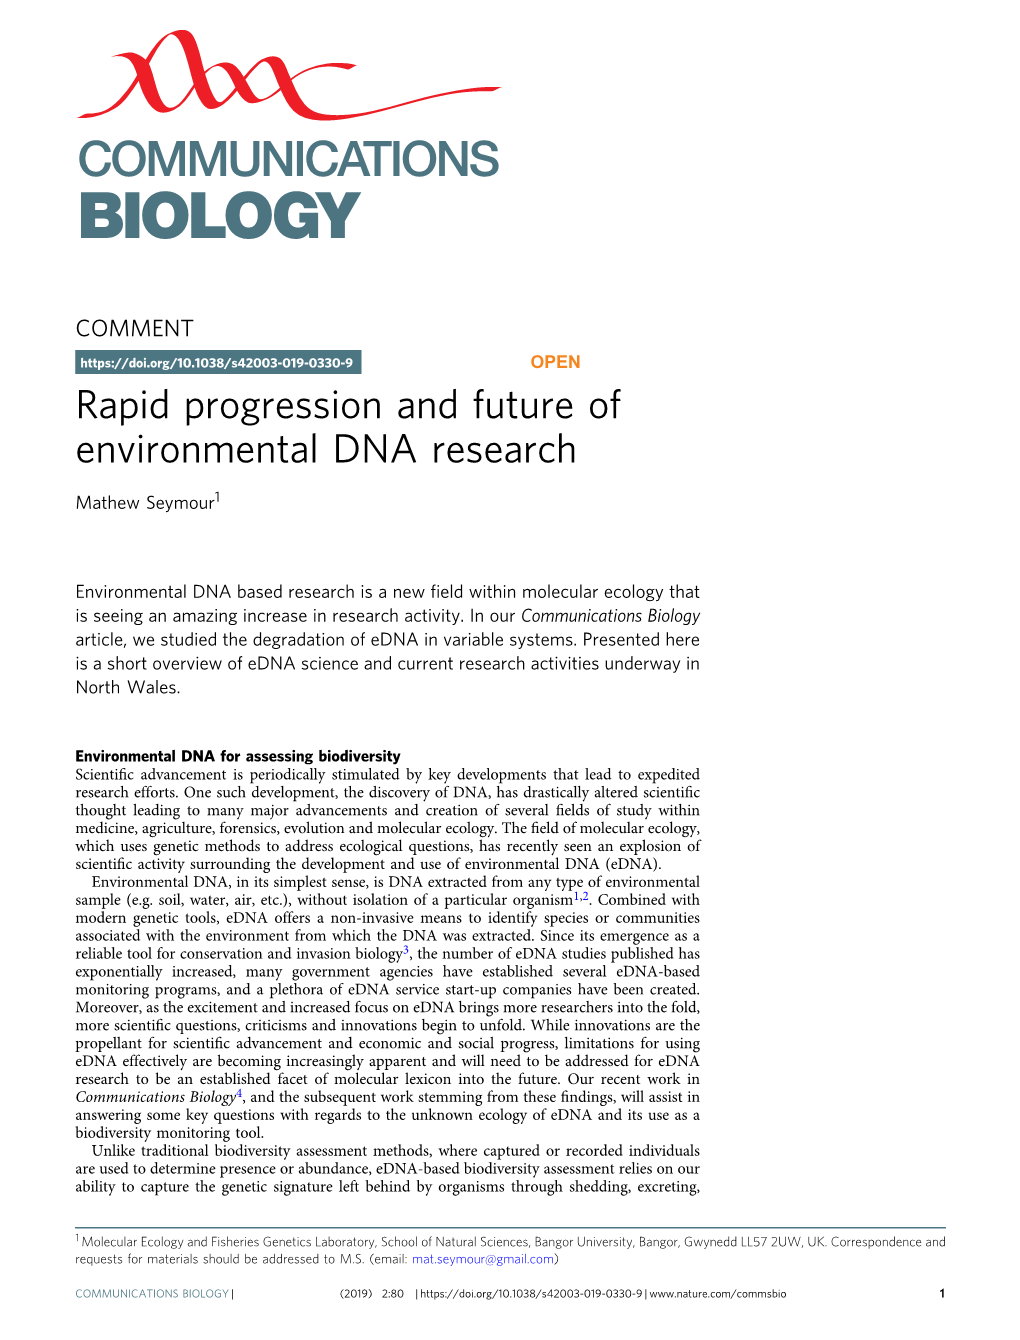 Rapid Progression and Future of Environmental DNA Research